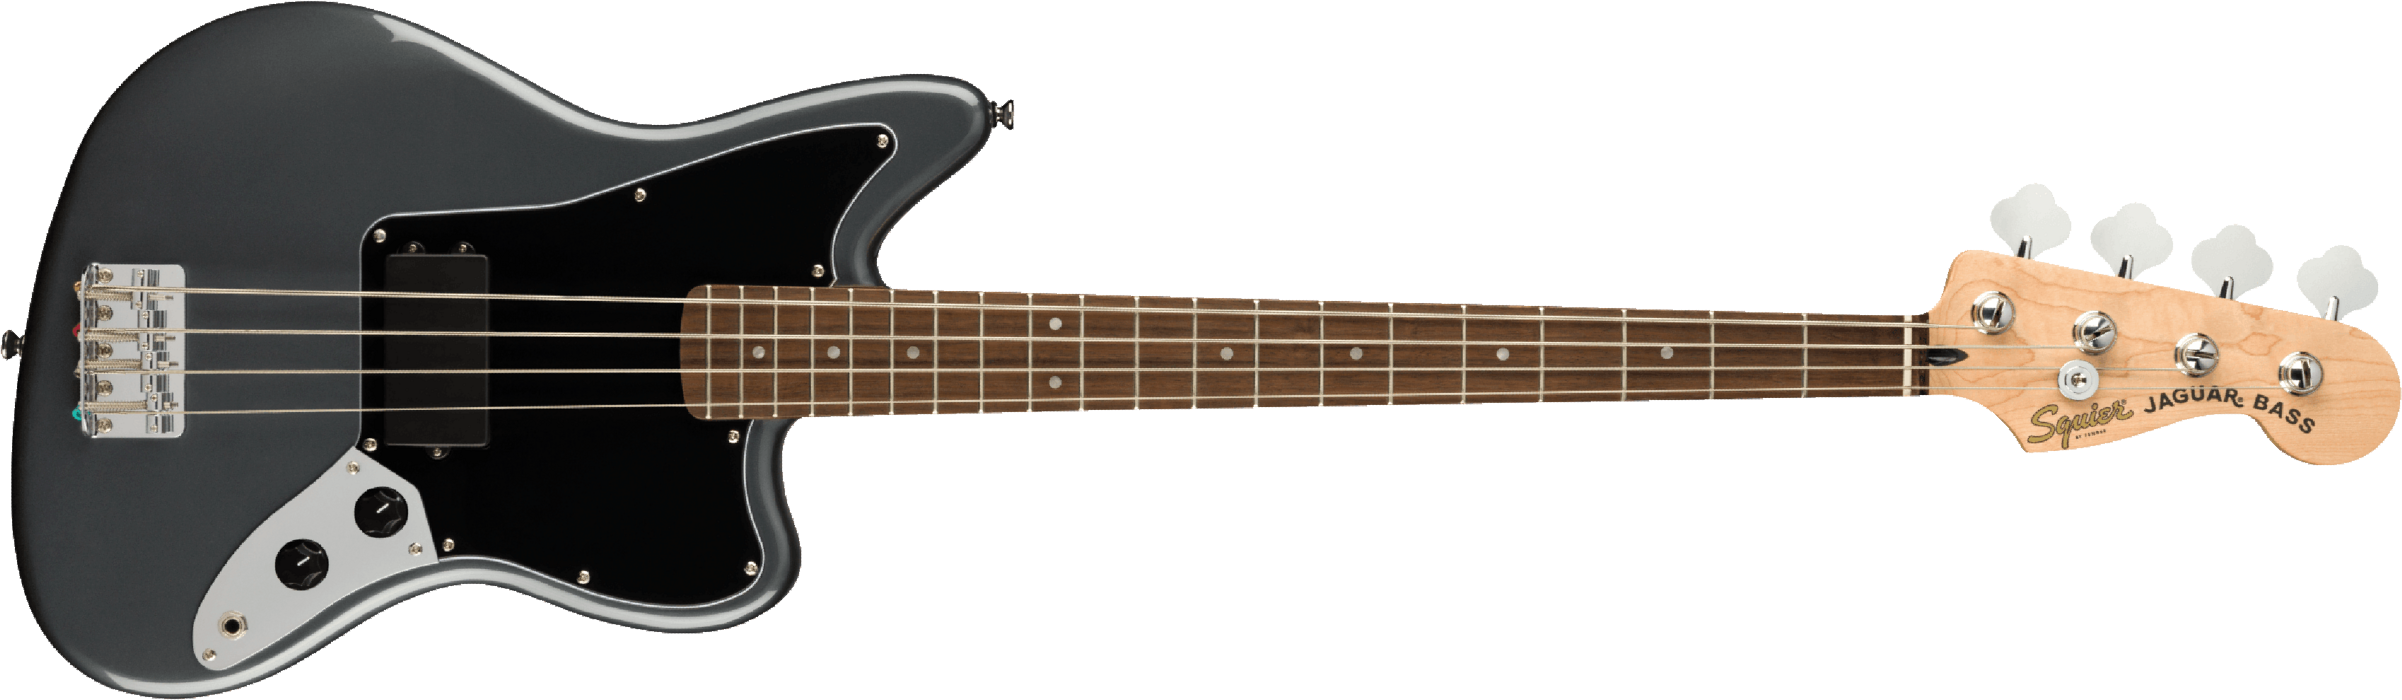 Squier Jaguar Bass Affinity 2021 Lau - Charcoal Frost Metallic - Solid body electric bass - Main picture